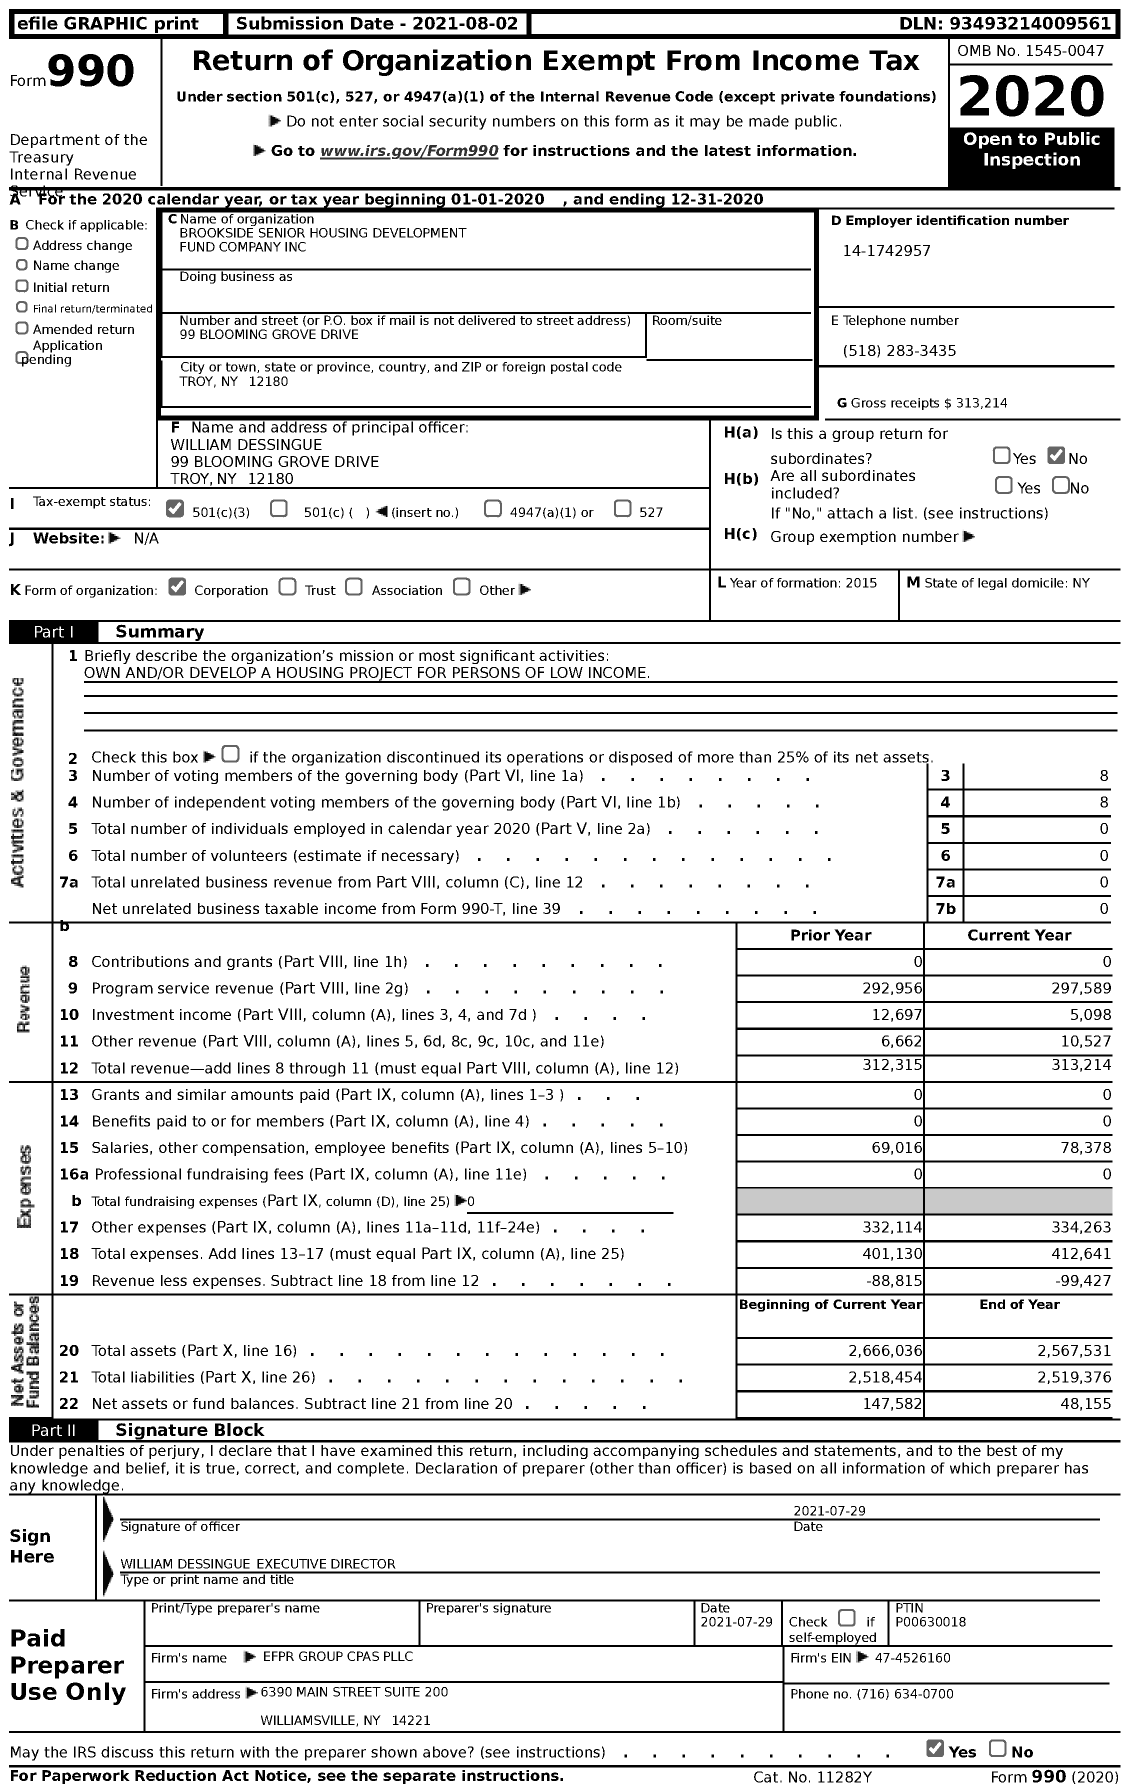 Image of first page of 2020 Form 990 for Brookside Senior Housing Development Fund Company